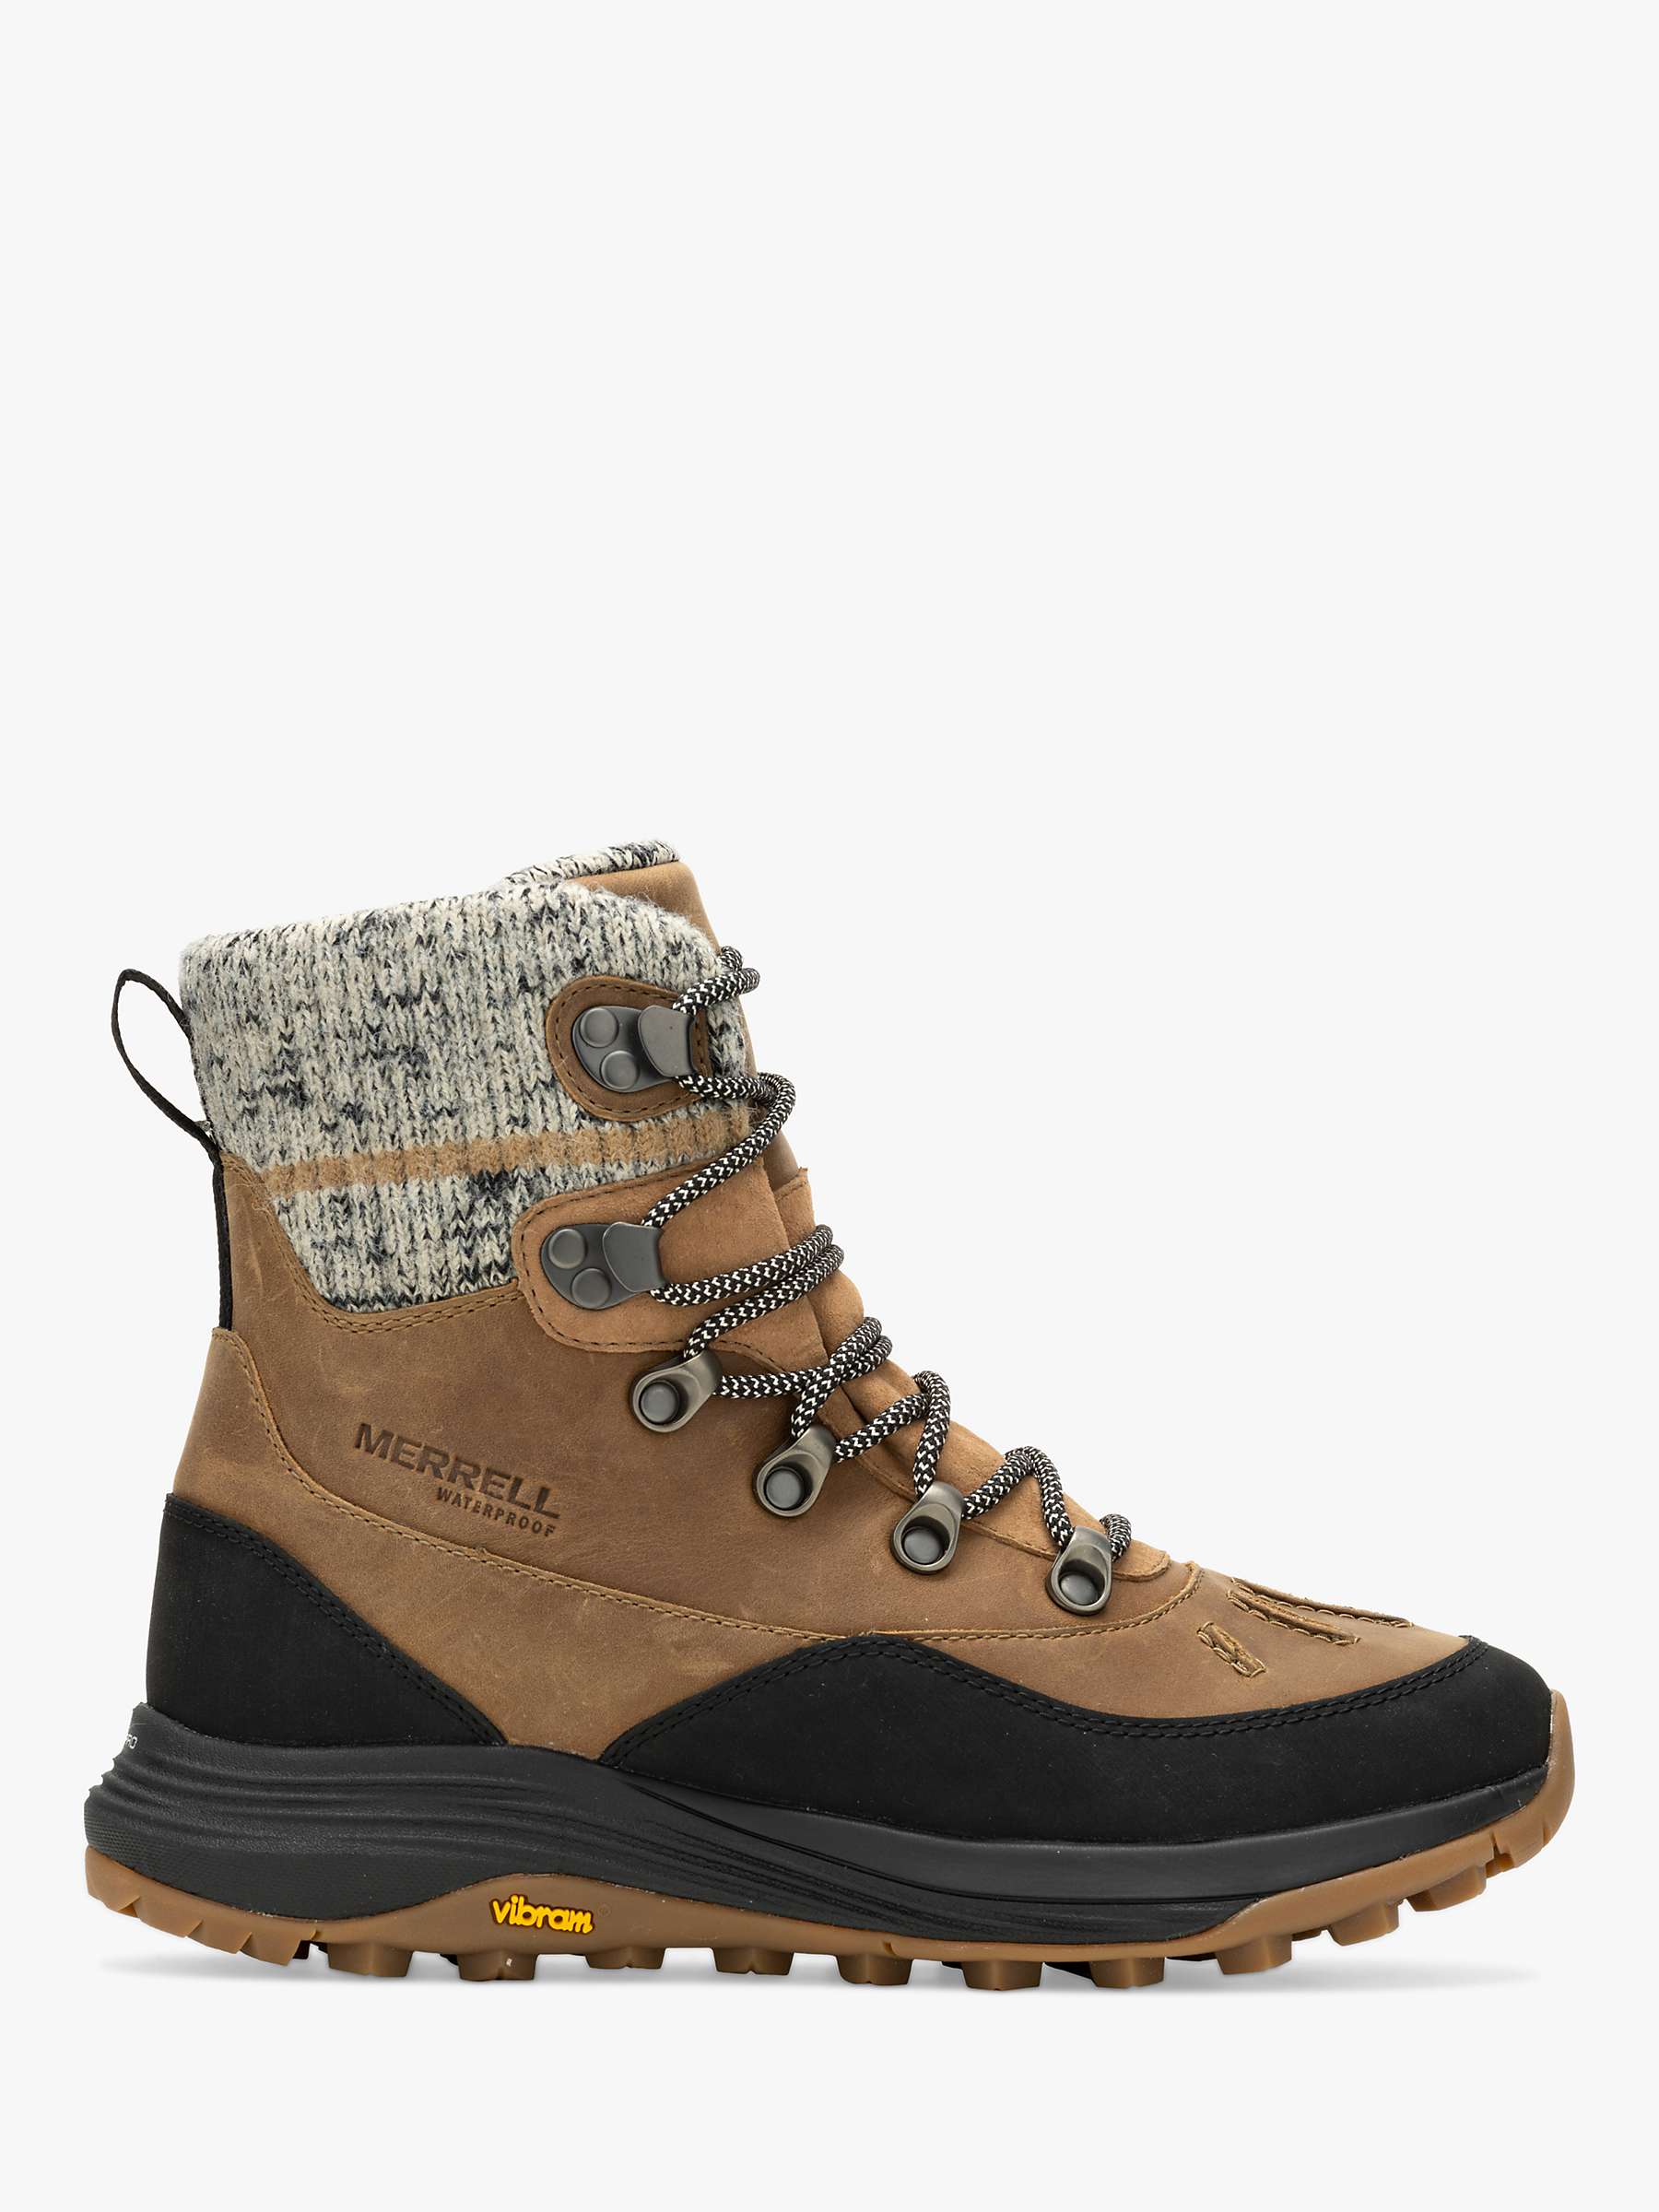 Buy Merrell Siren 4 Thermo Women's Waterproof Hiking Boots, Tobacco Online at johnlewis.com